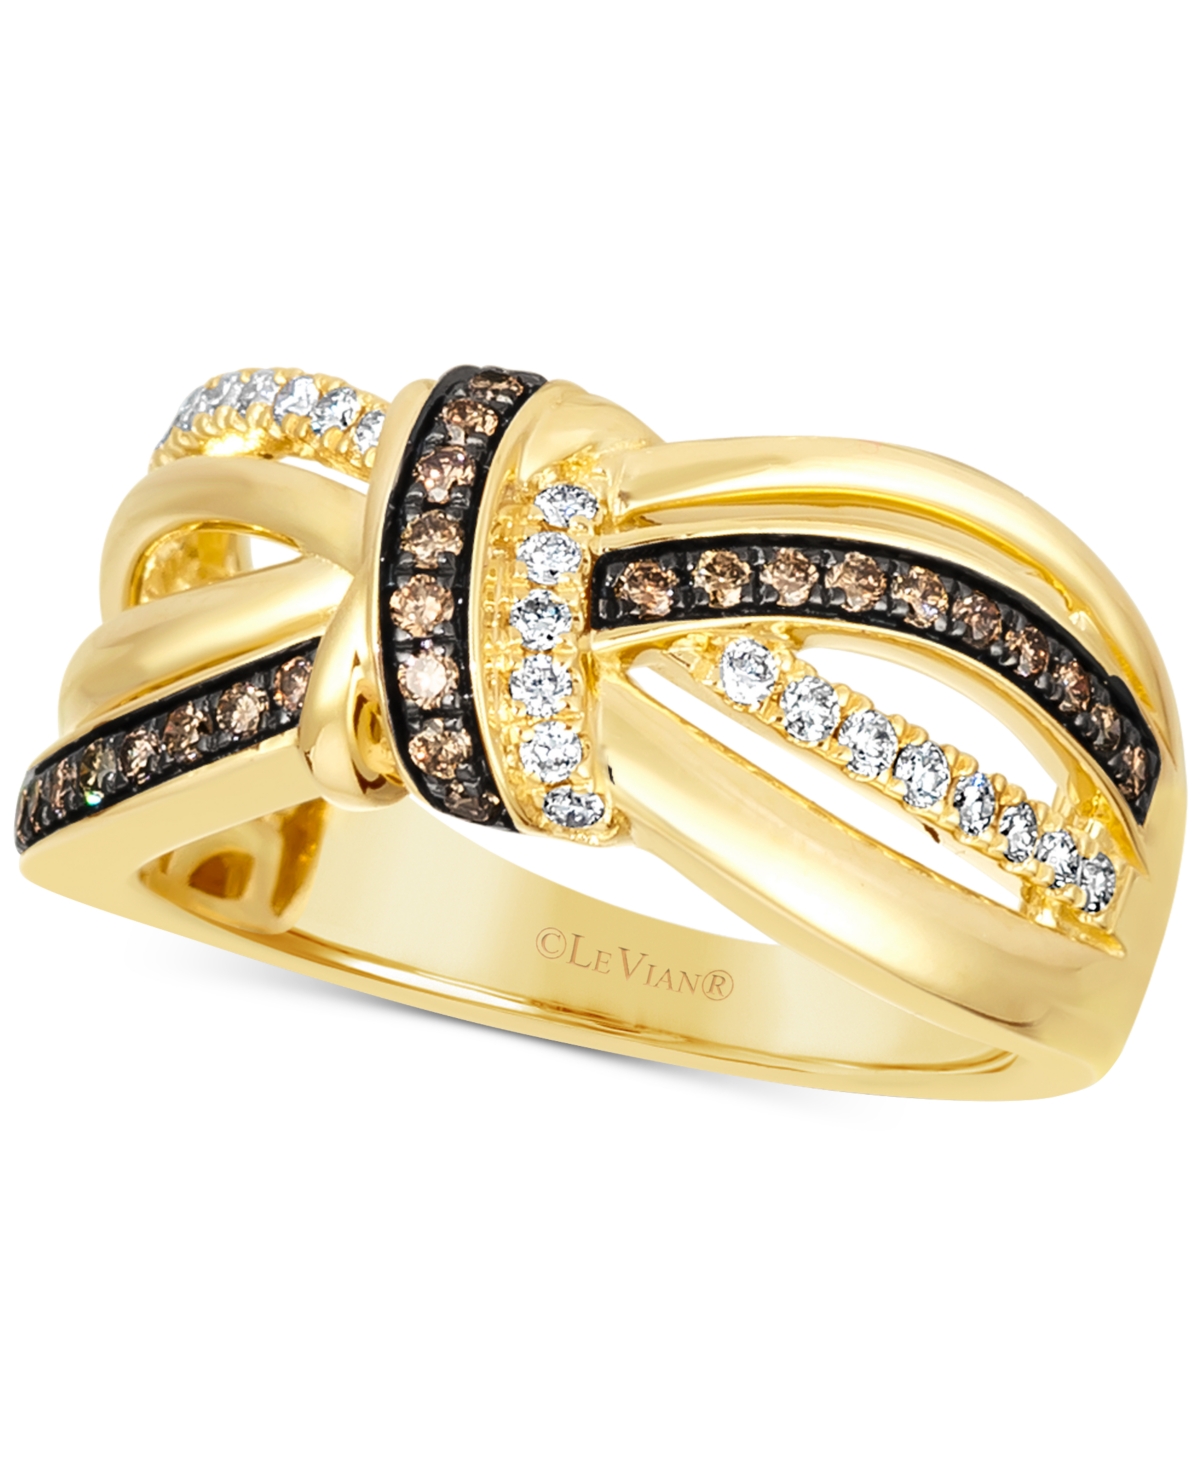 Le Vian Chocolate Diamond & Nude Diamond Knot Ring (3/8 Ct. T.w.) In 14k Gold In K Honey Gold Ring